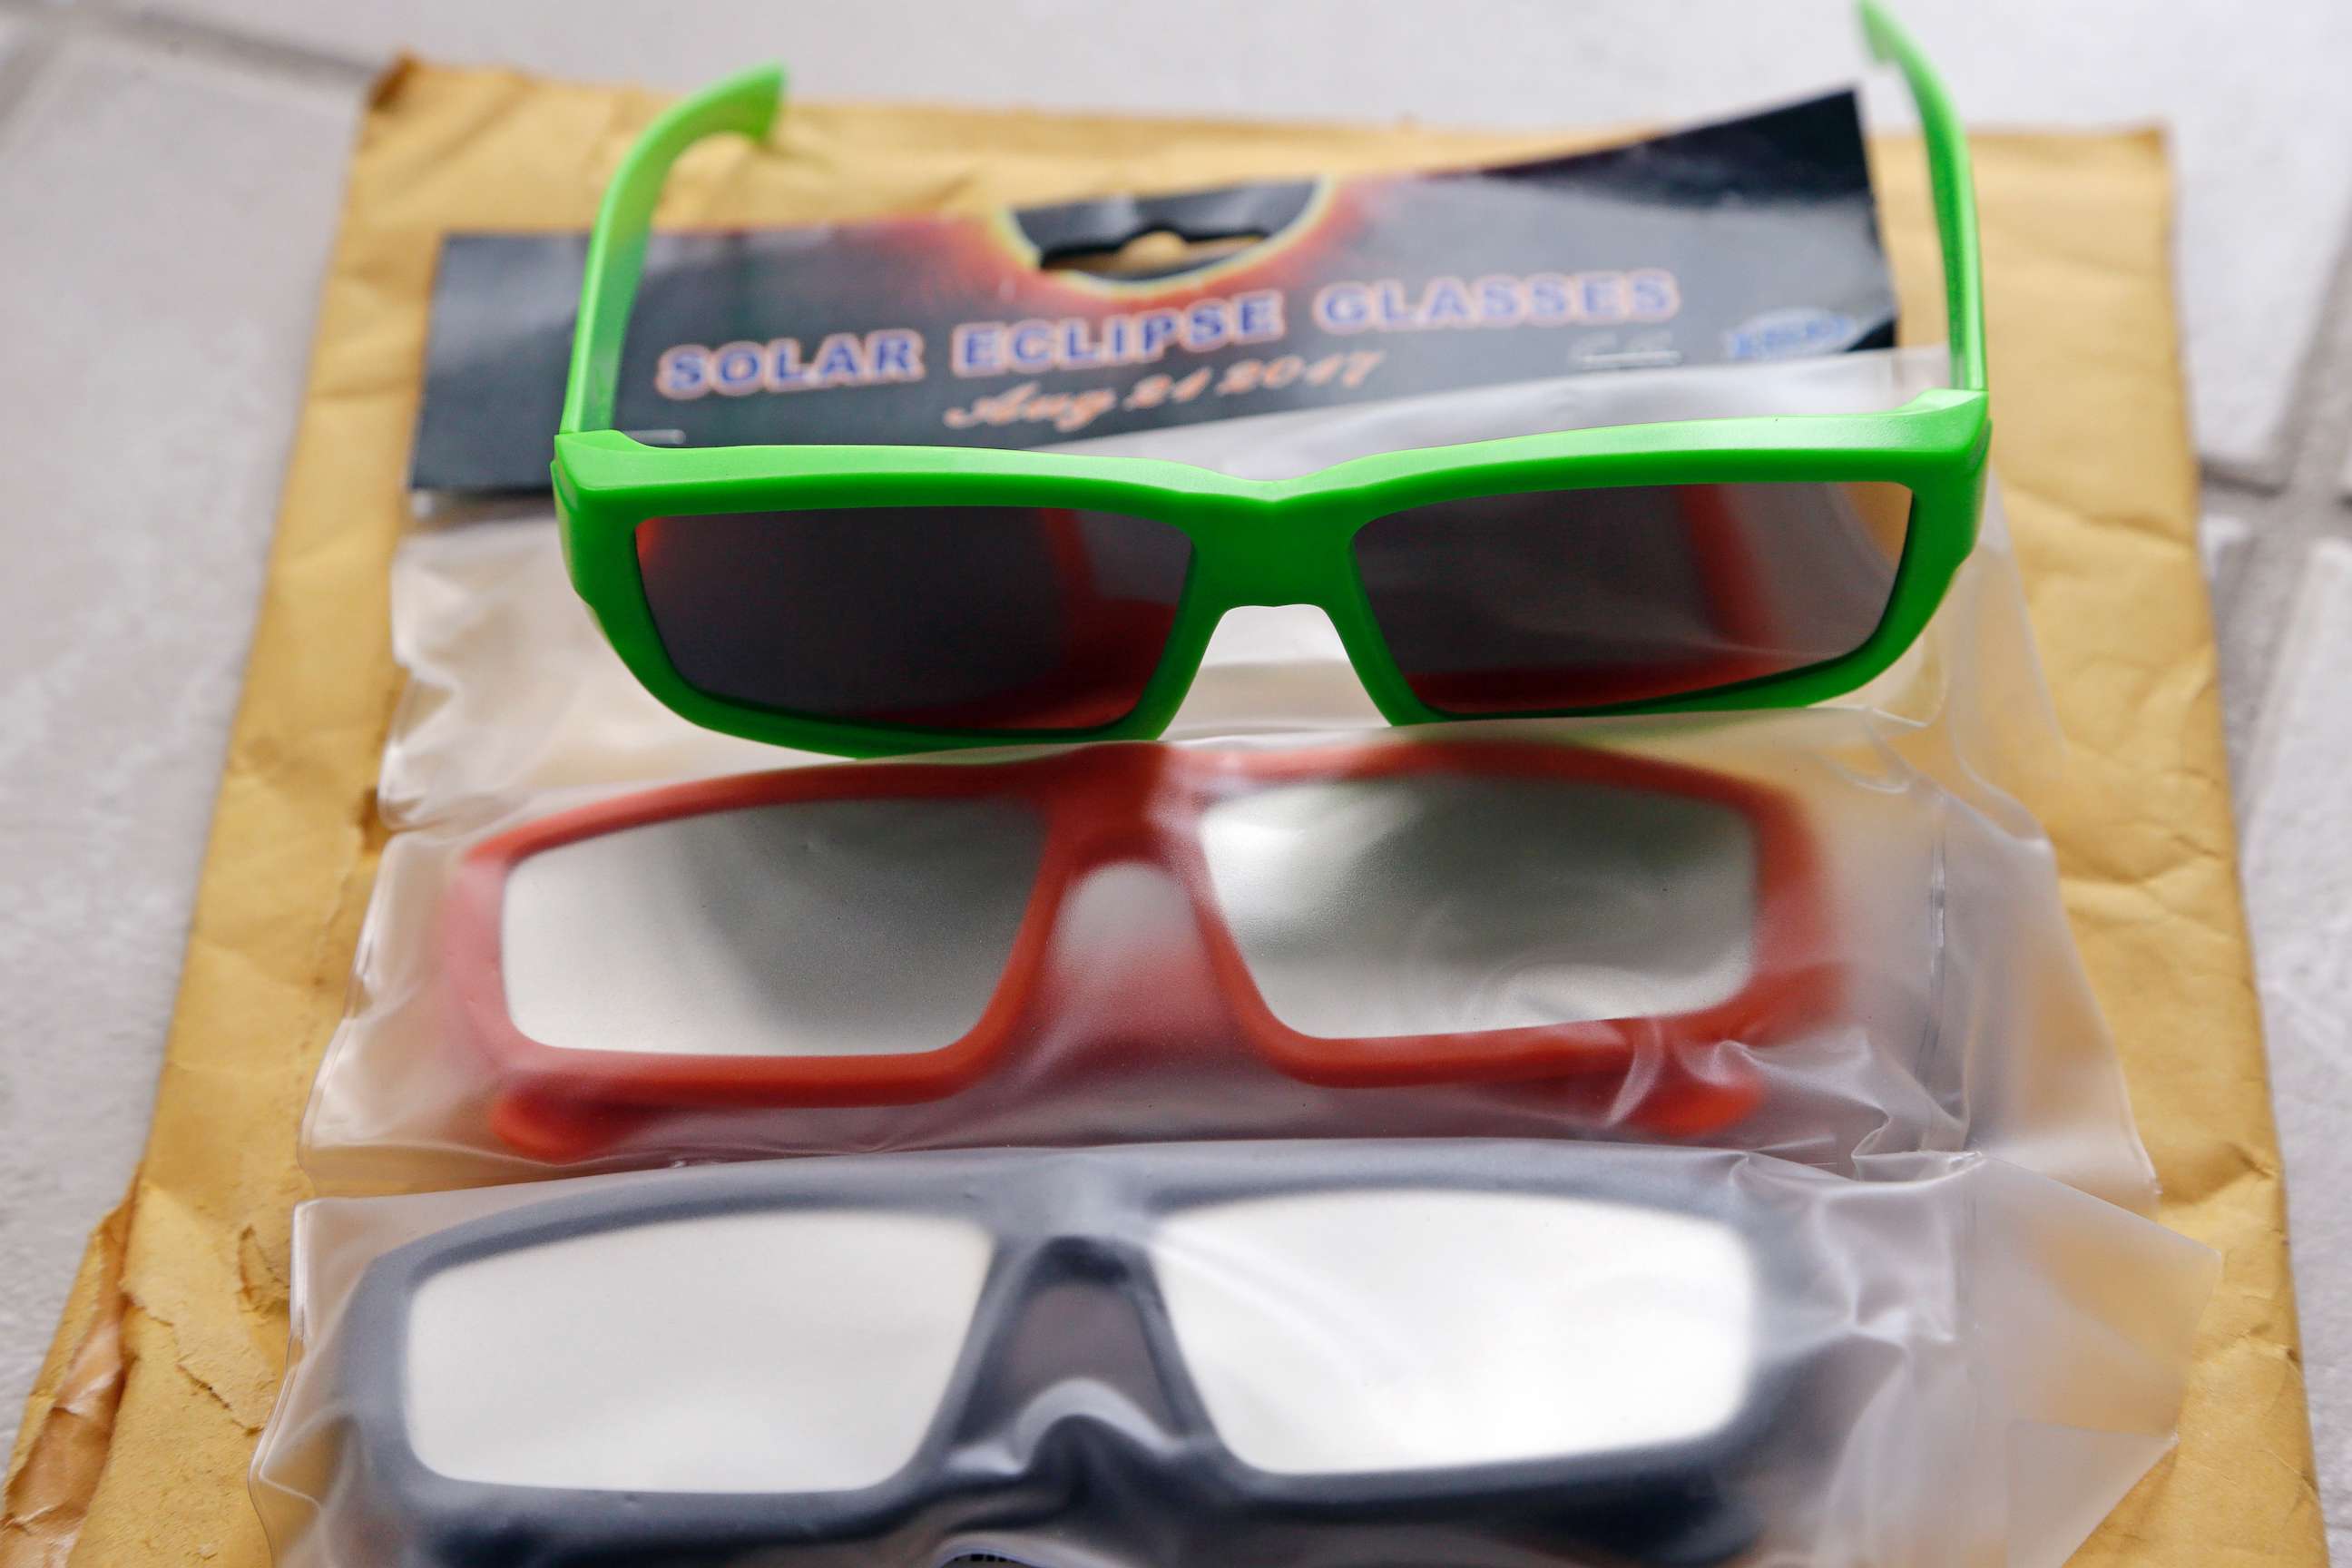 PHOTO: A three-pack of "solar eclipse glasses" shipped by Amazon to a Seattle home in advance of the upcoming solar eclipse is seen, Aug. 13, 2017, in Seattle.